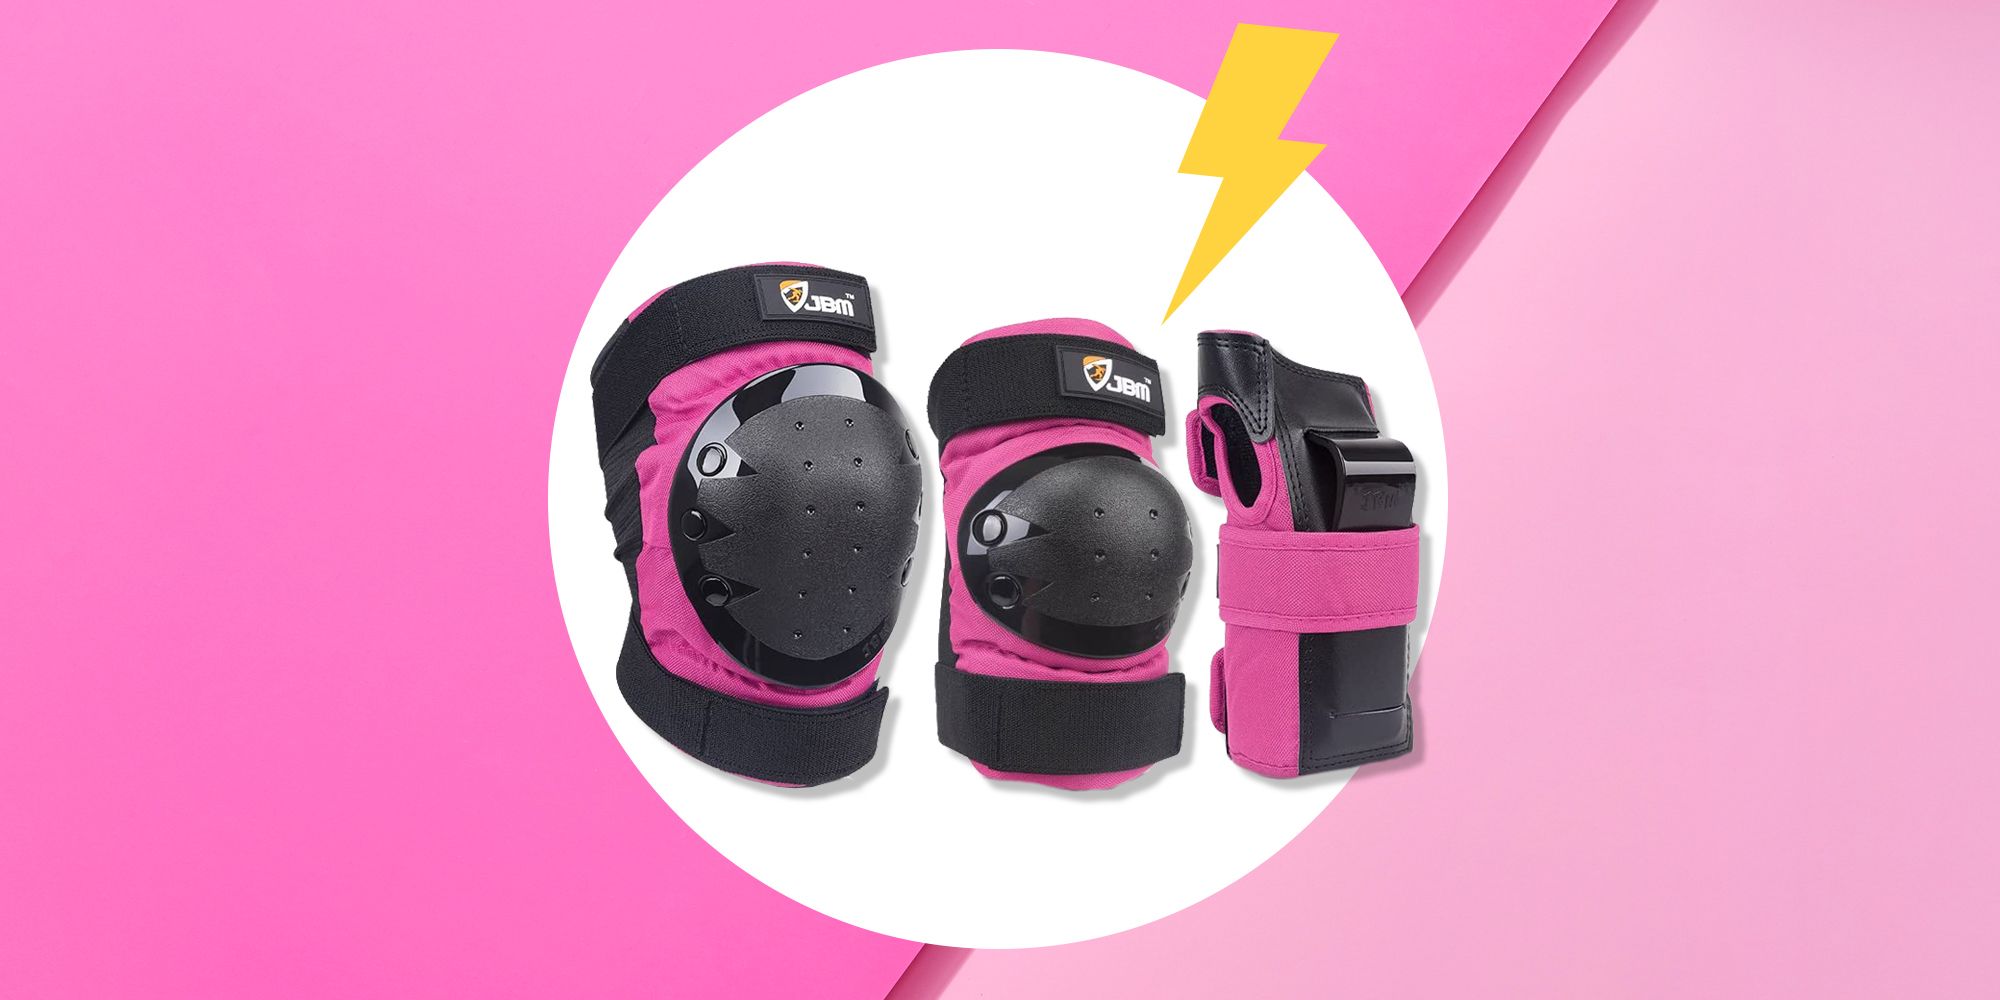 Protective Knee Pads With Straps For Work Flexible And Durable Safety Equipment 